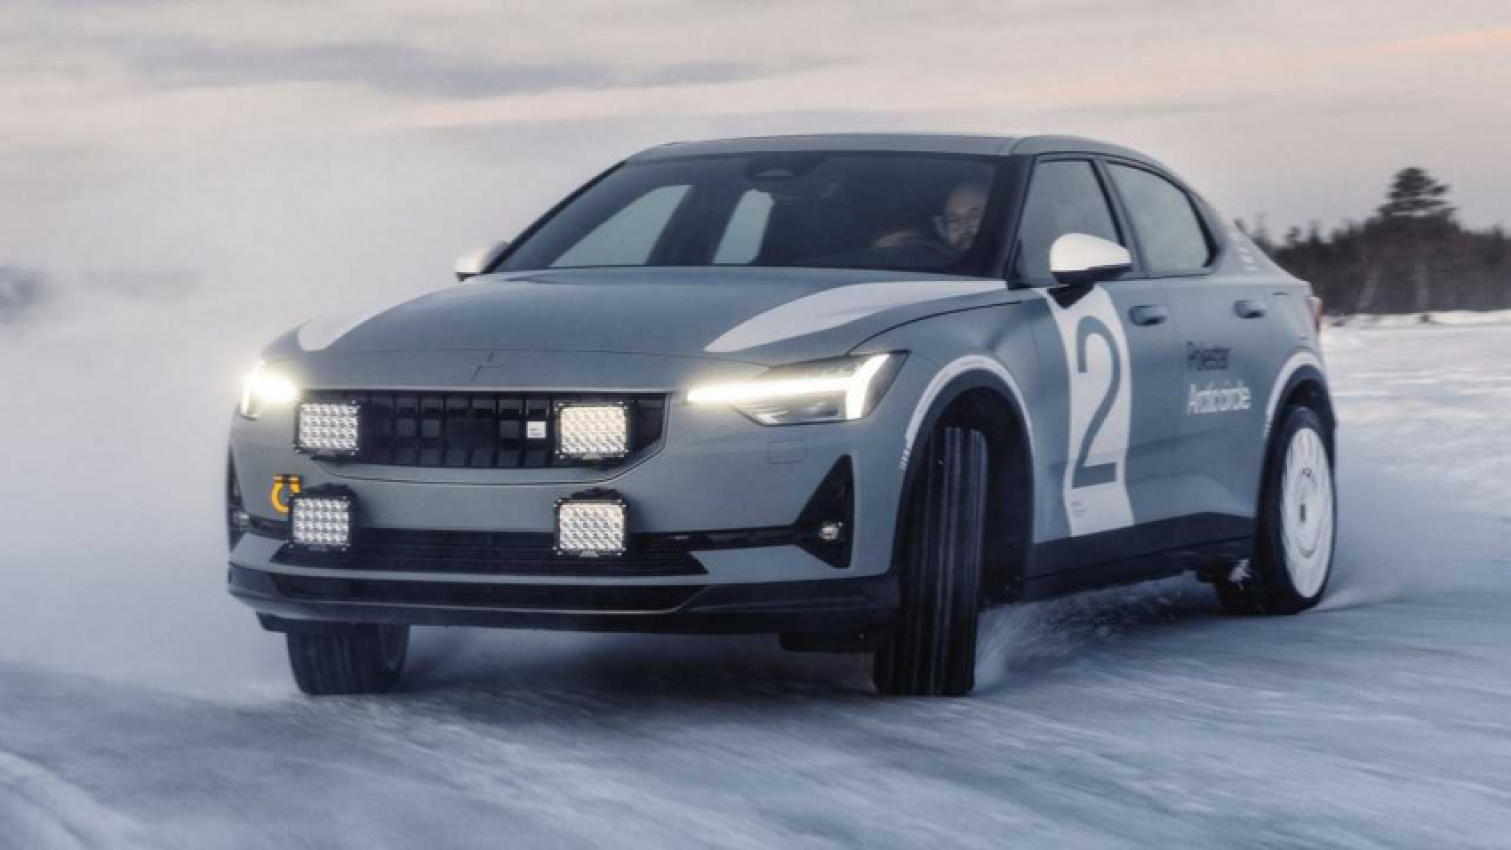 autos, cars, evs, polestar, polestar 2 arctic circle is a one-off ev that wants to go rallying